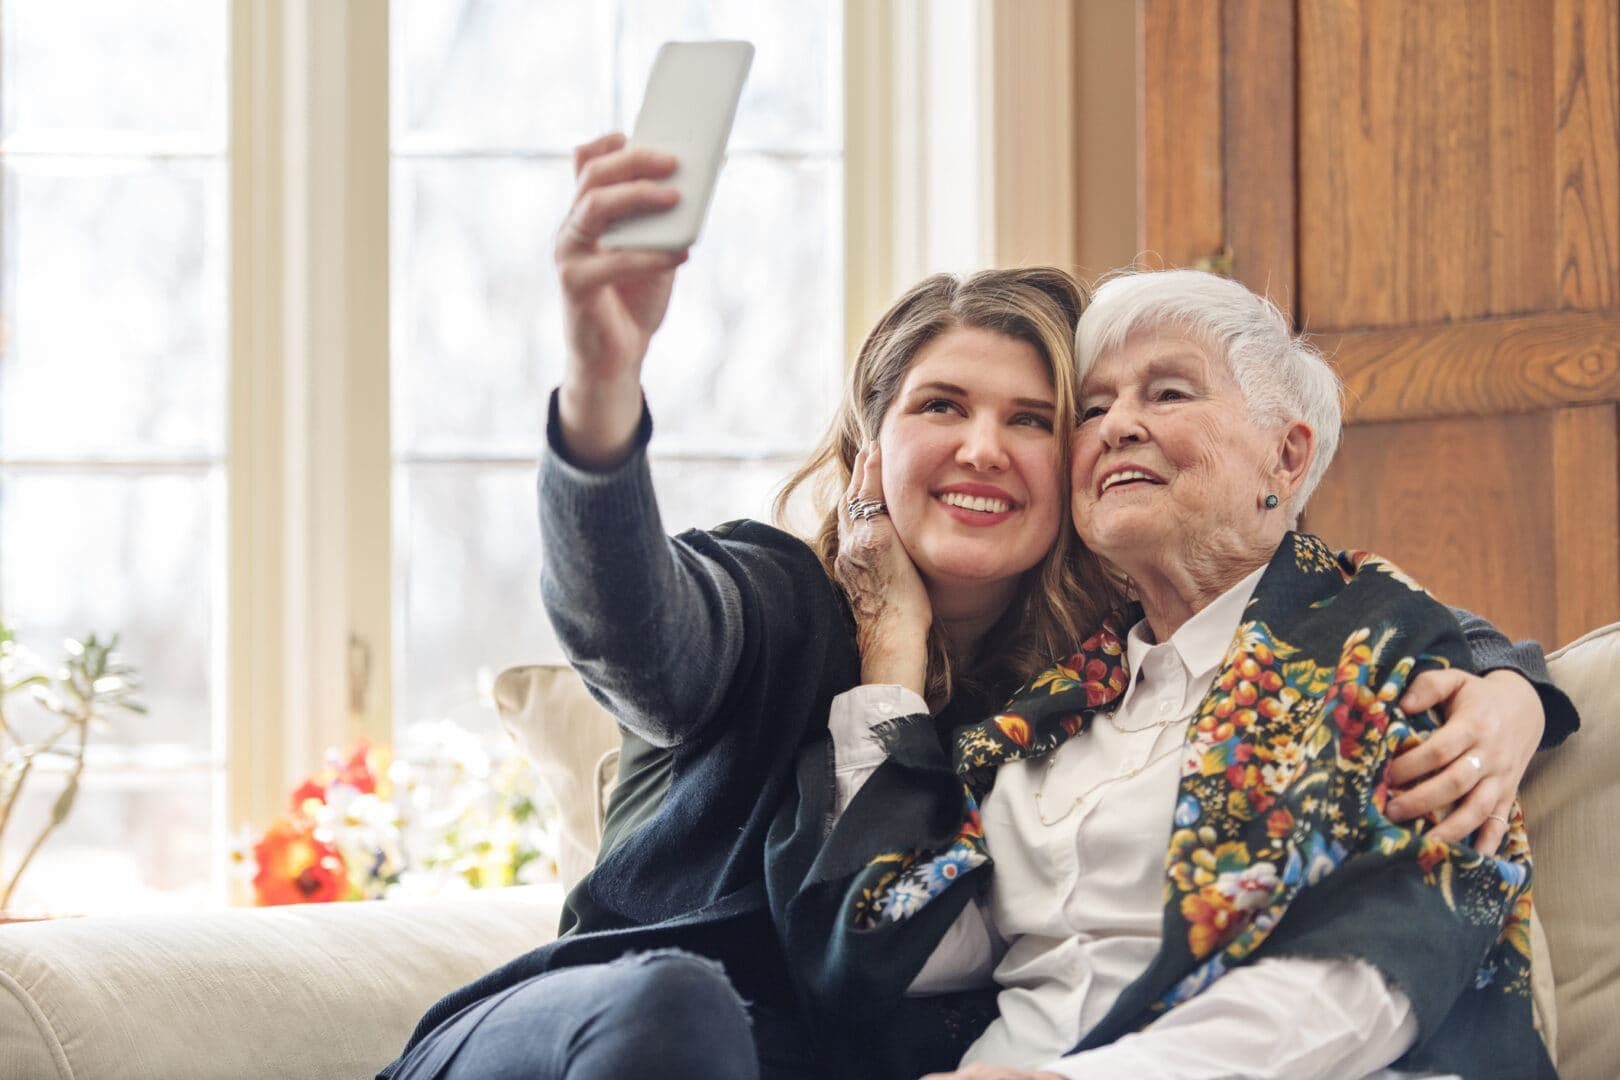 Mother’s Day gift ideas for seniors of all ability levels